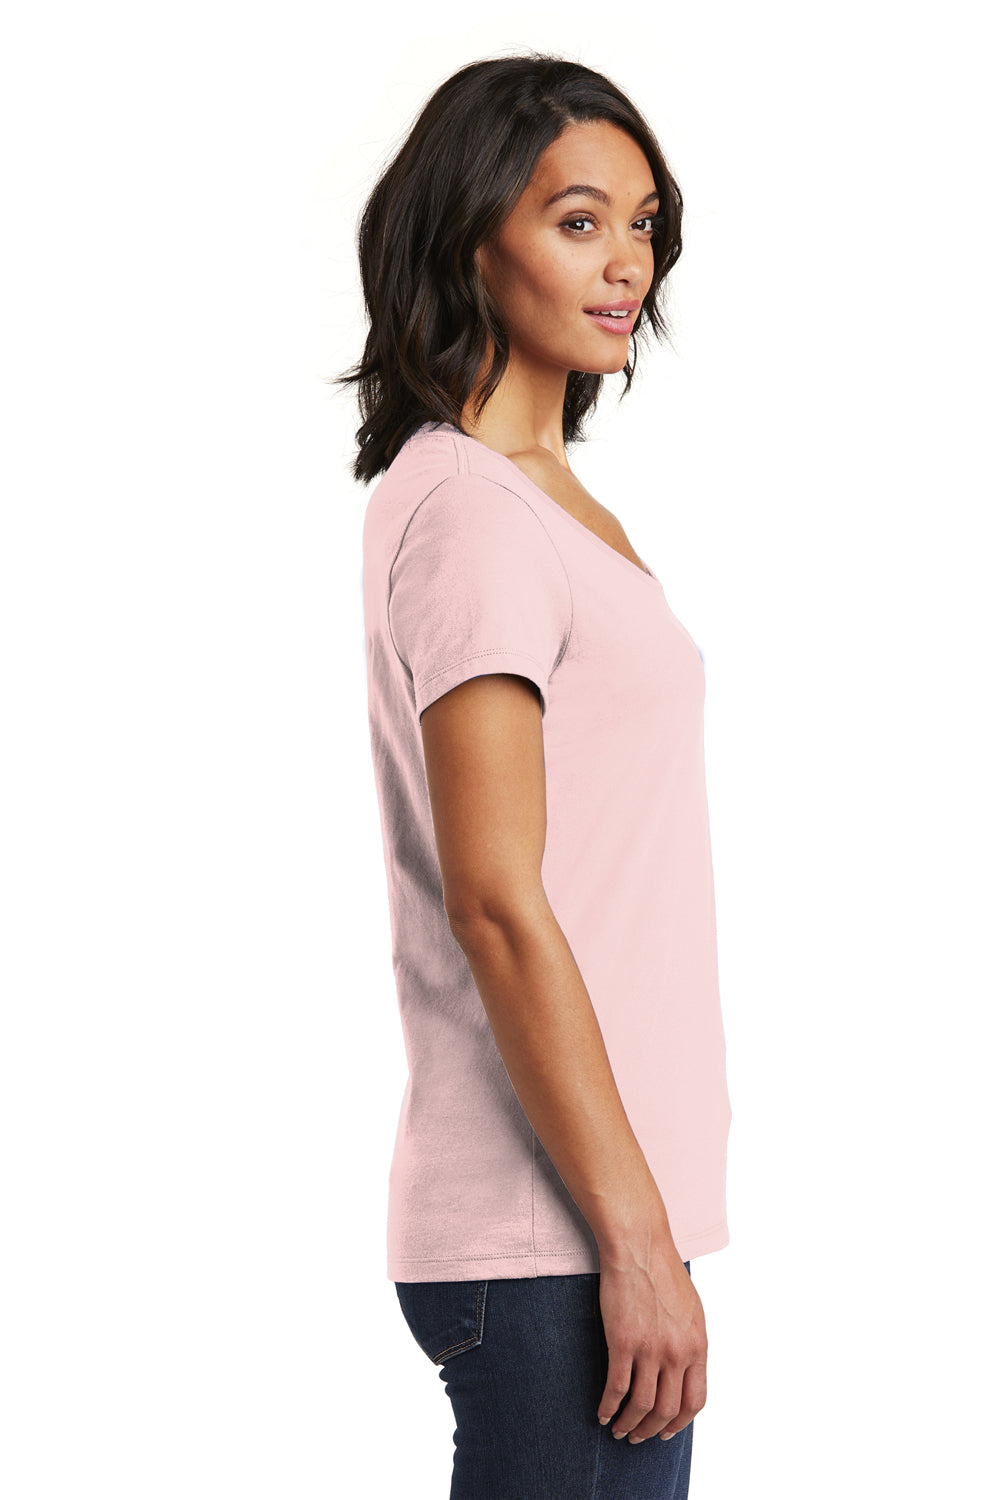 District DT6503 Womens Very Important Short Sleeve V-Neck T-Shirt Dusty Pink Side